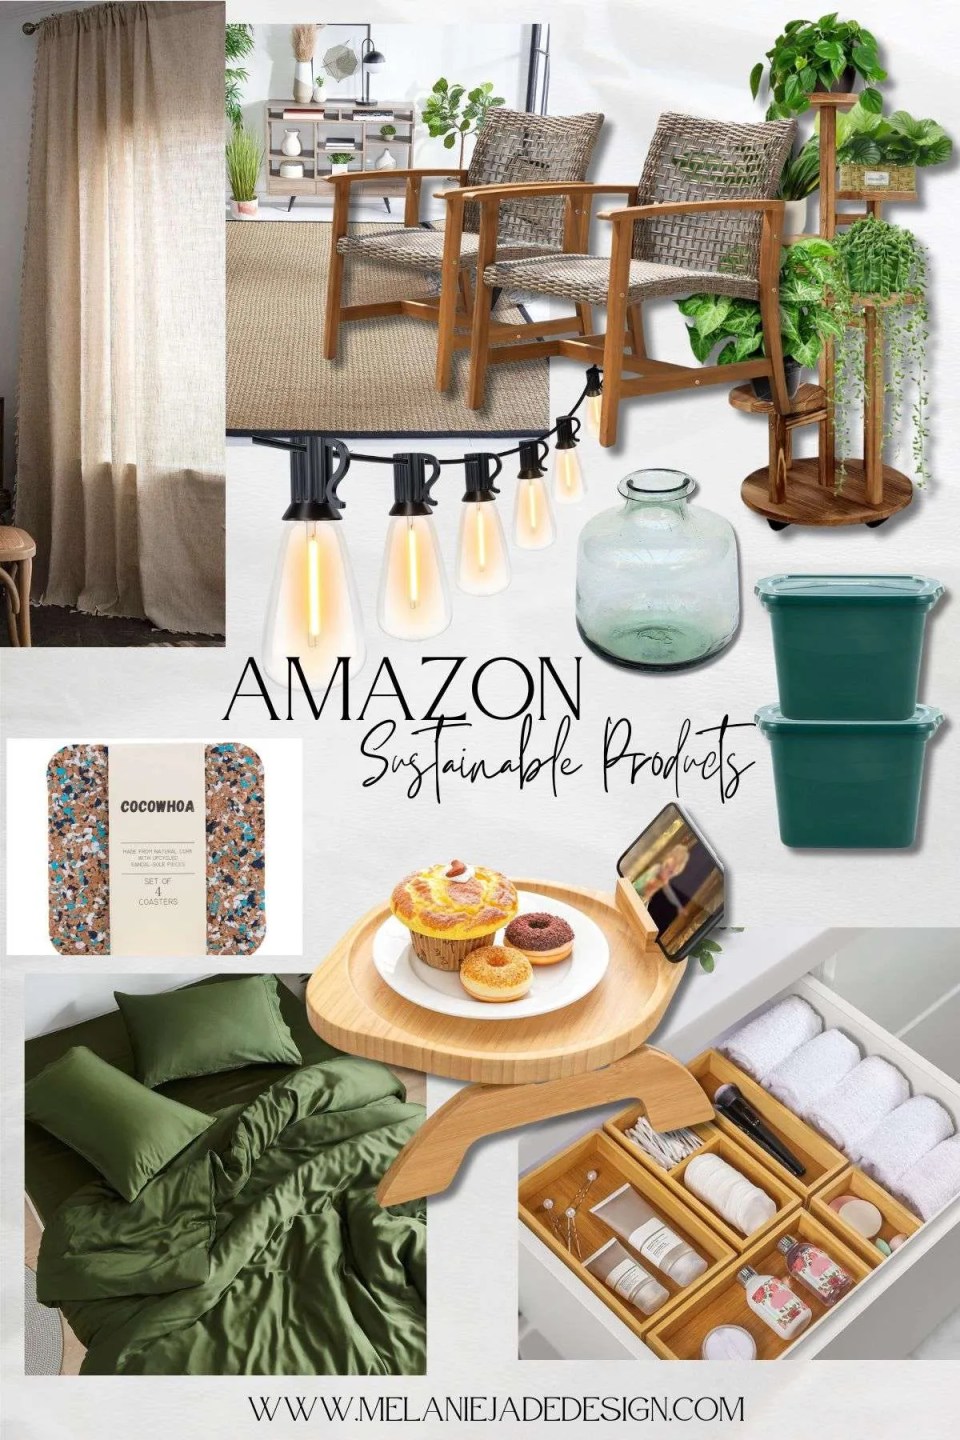 a moodboard with sustainable products on Amazon including vases, storage boxes, furniture and jute rug